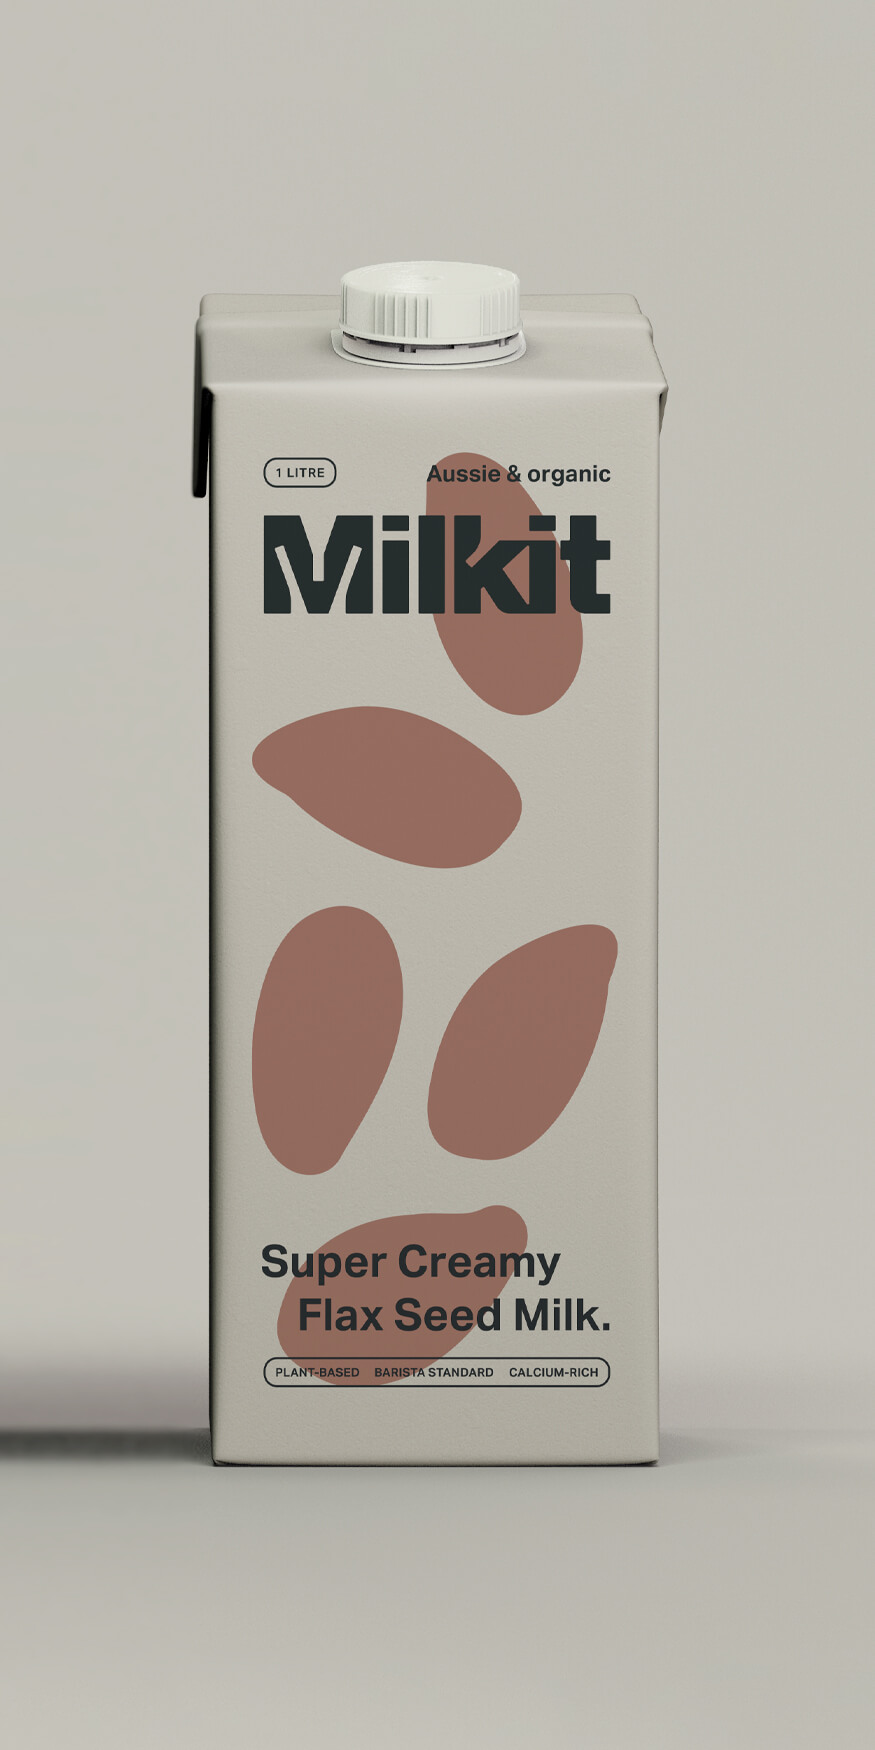 Packaging design for a carton of Milkit Flax Seed Milk featuring minimal flax seed brand illustration.